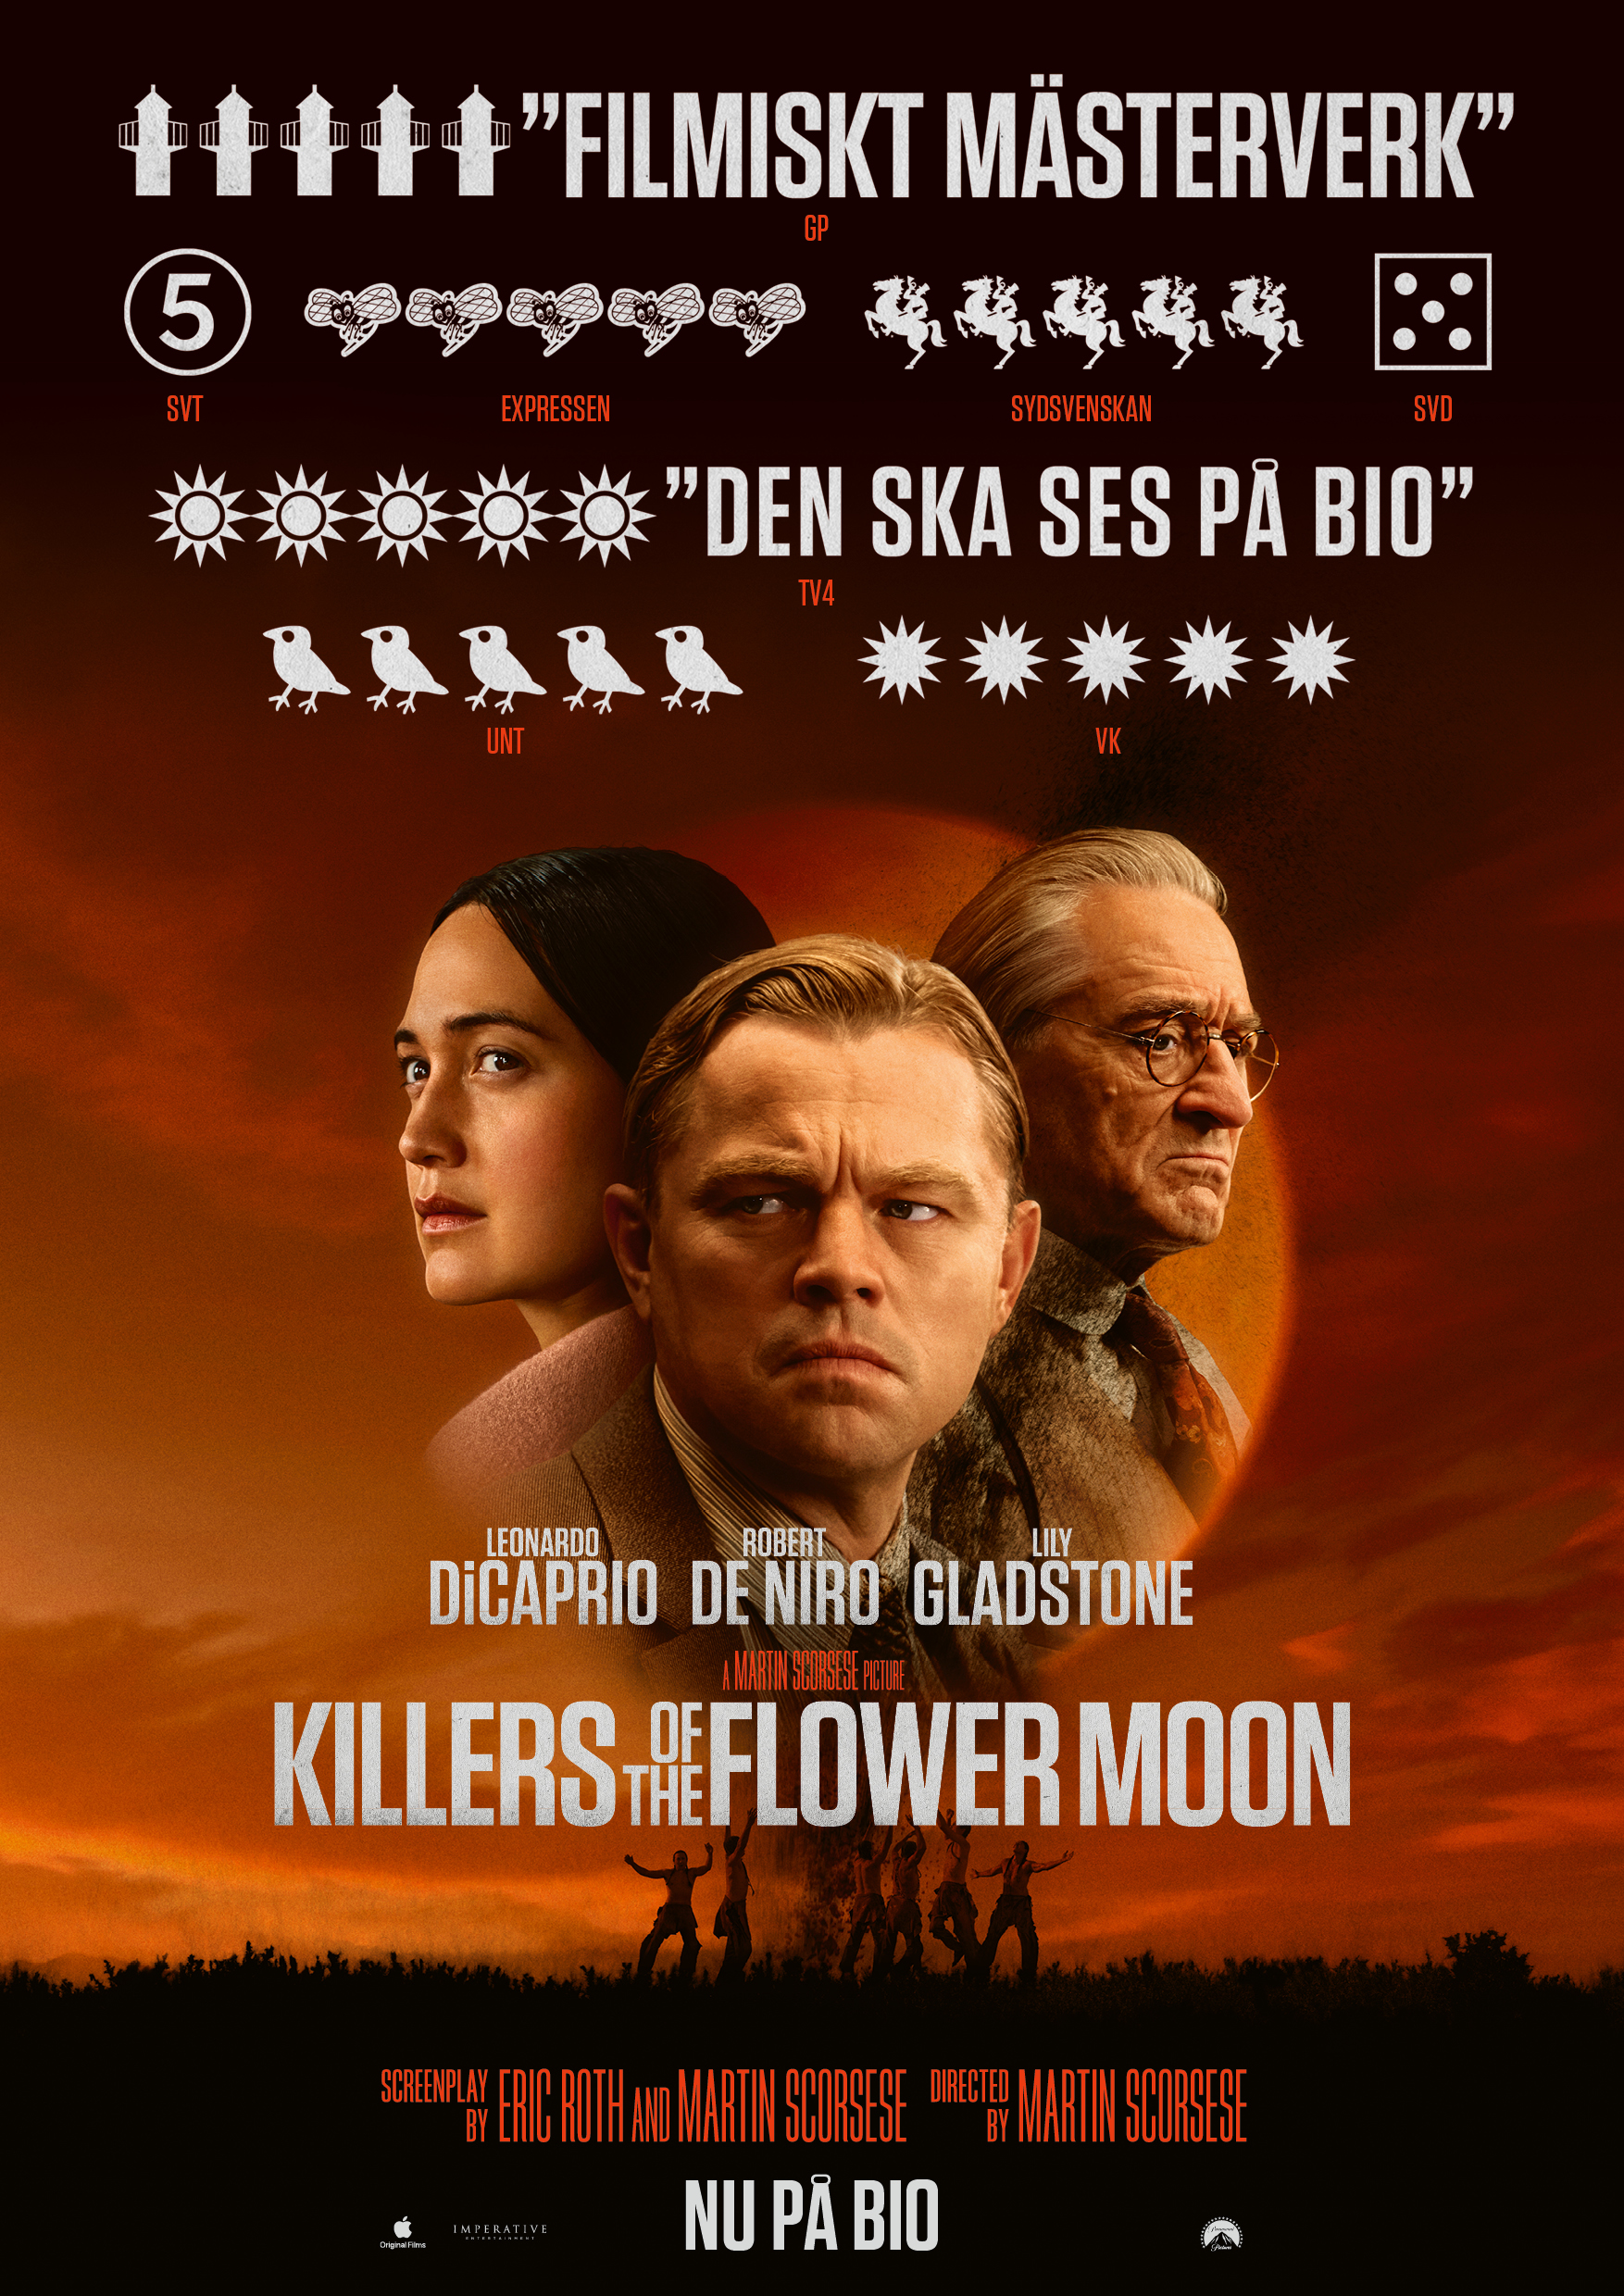 Killers of the Flower Moon